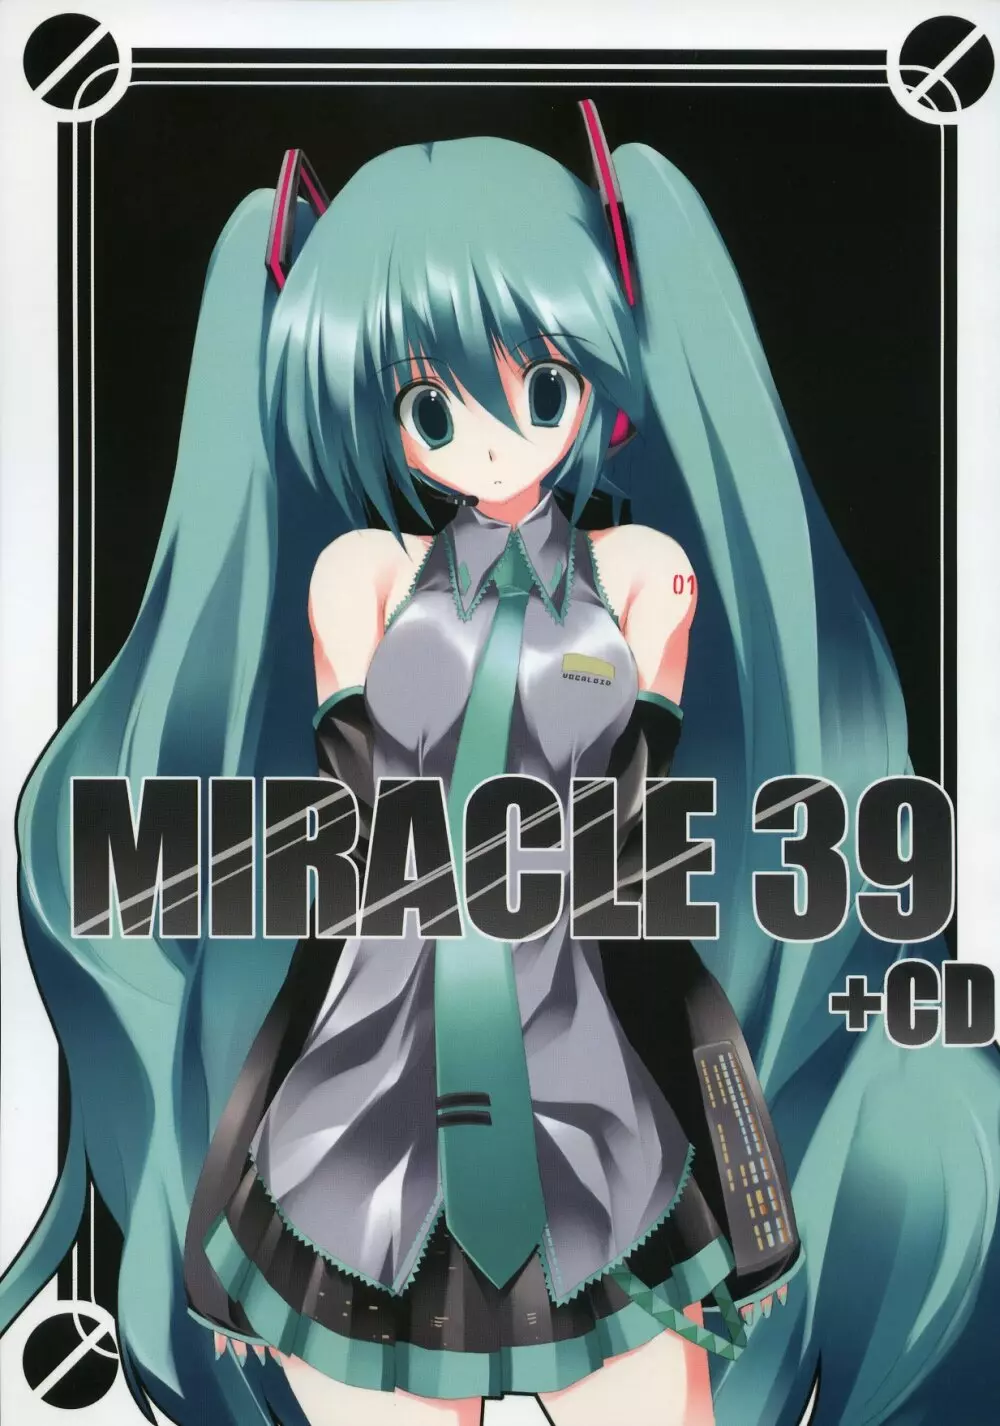 MIRACLE 39 +CD Page.1